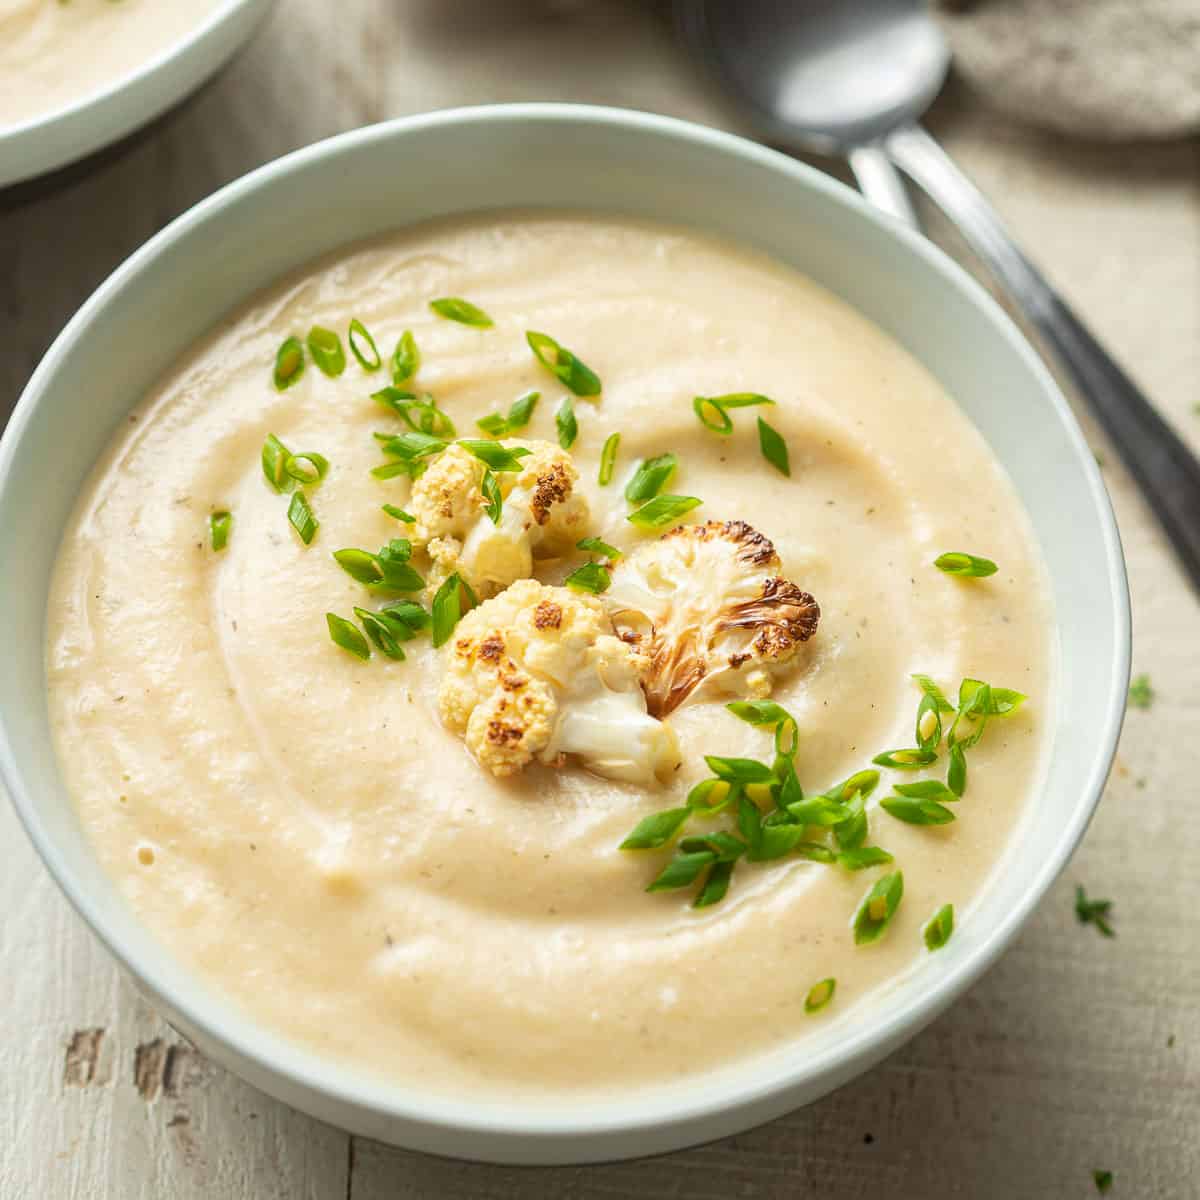 Bowl of Vegan Cauliflower Soup with chives and roasted cauliflower florets on top.